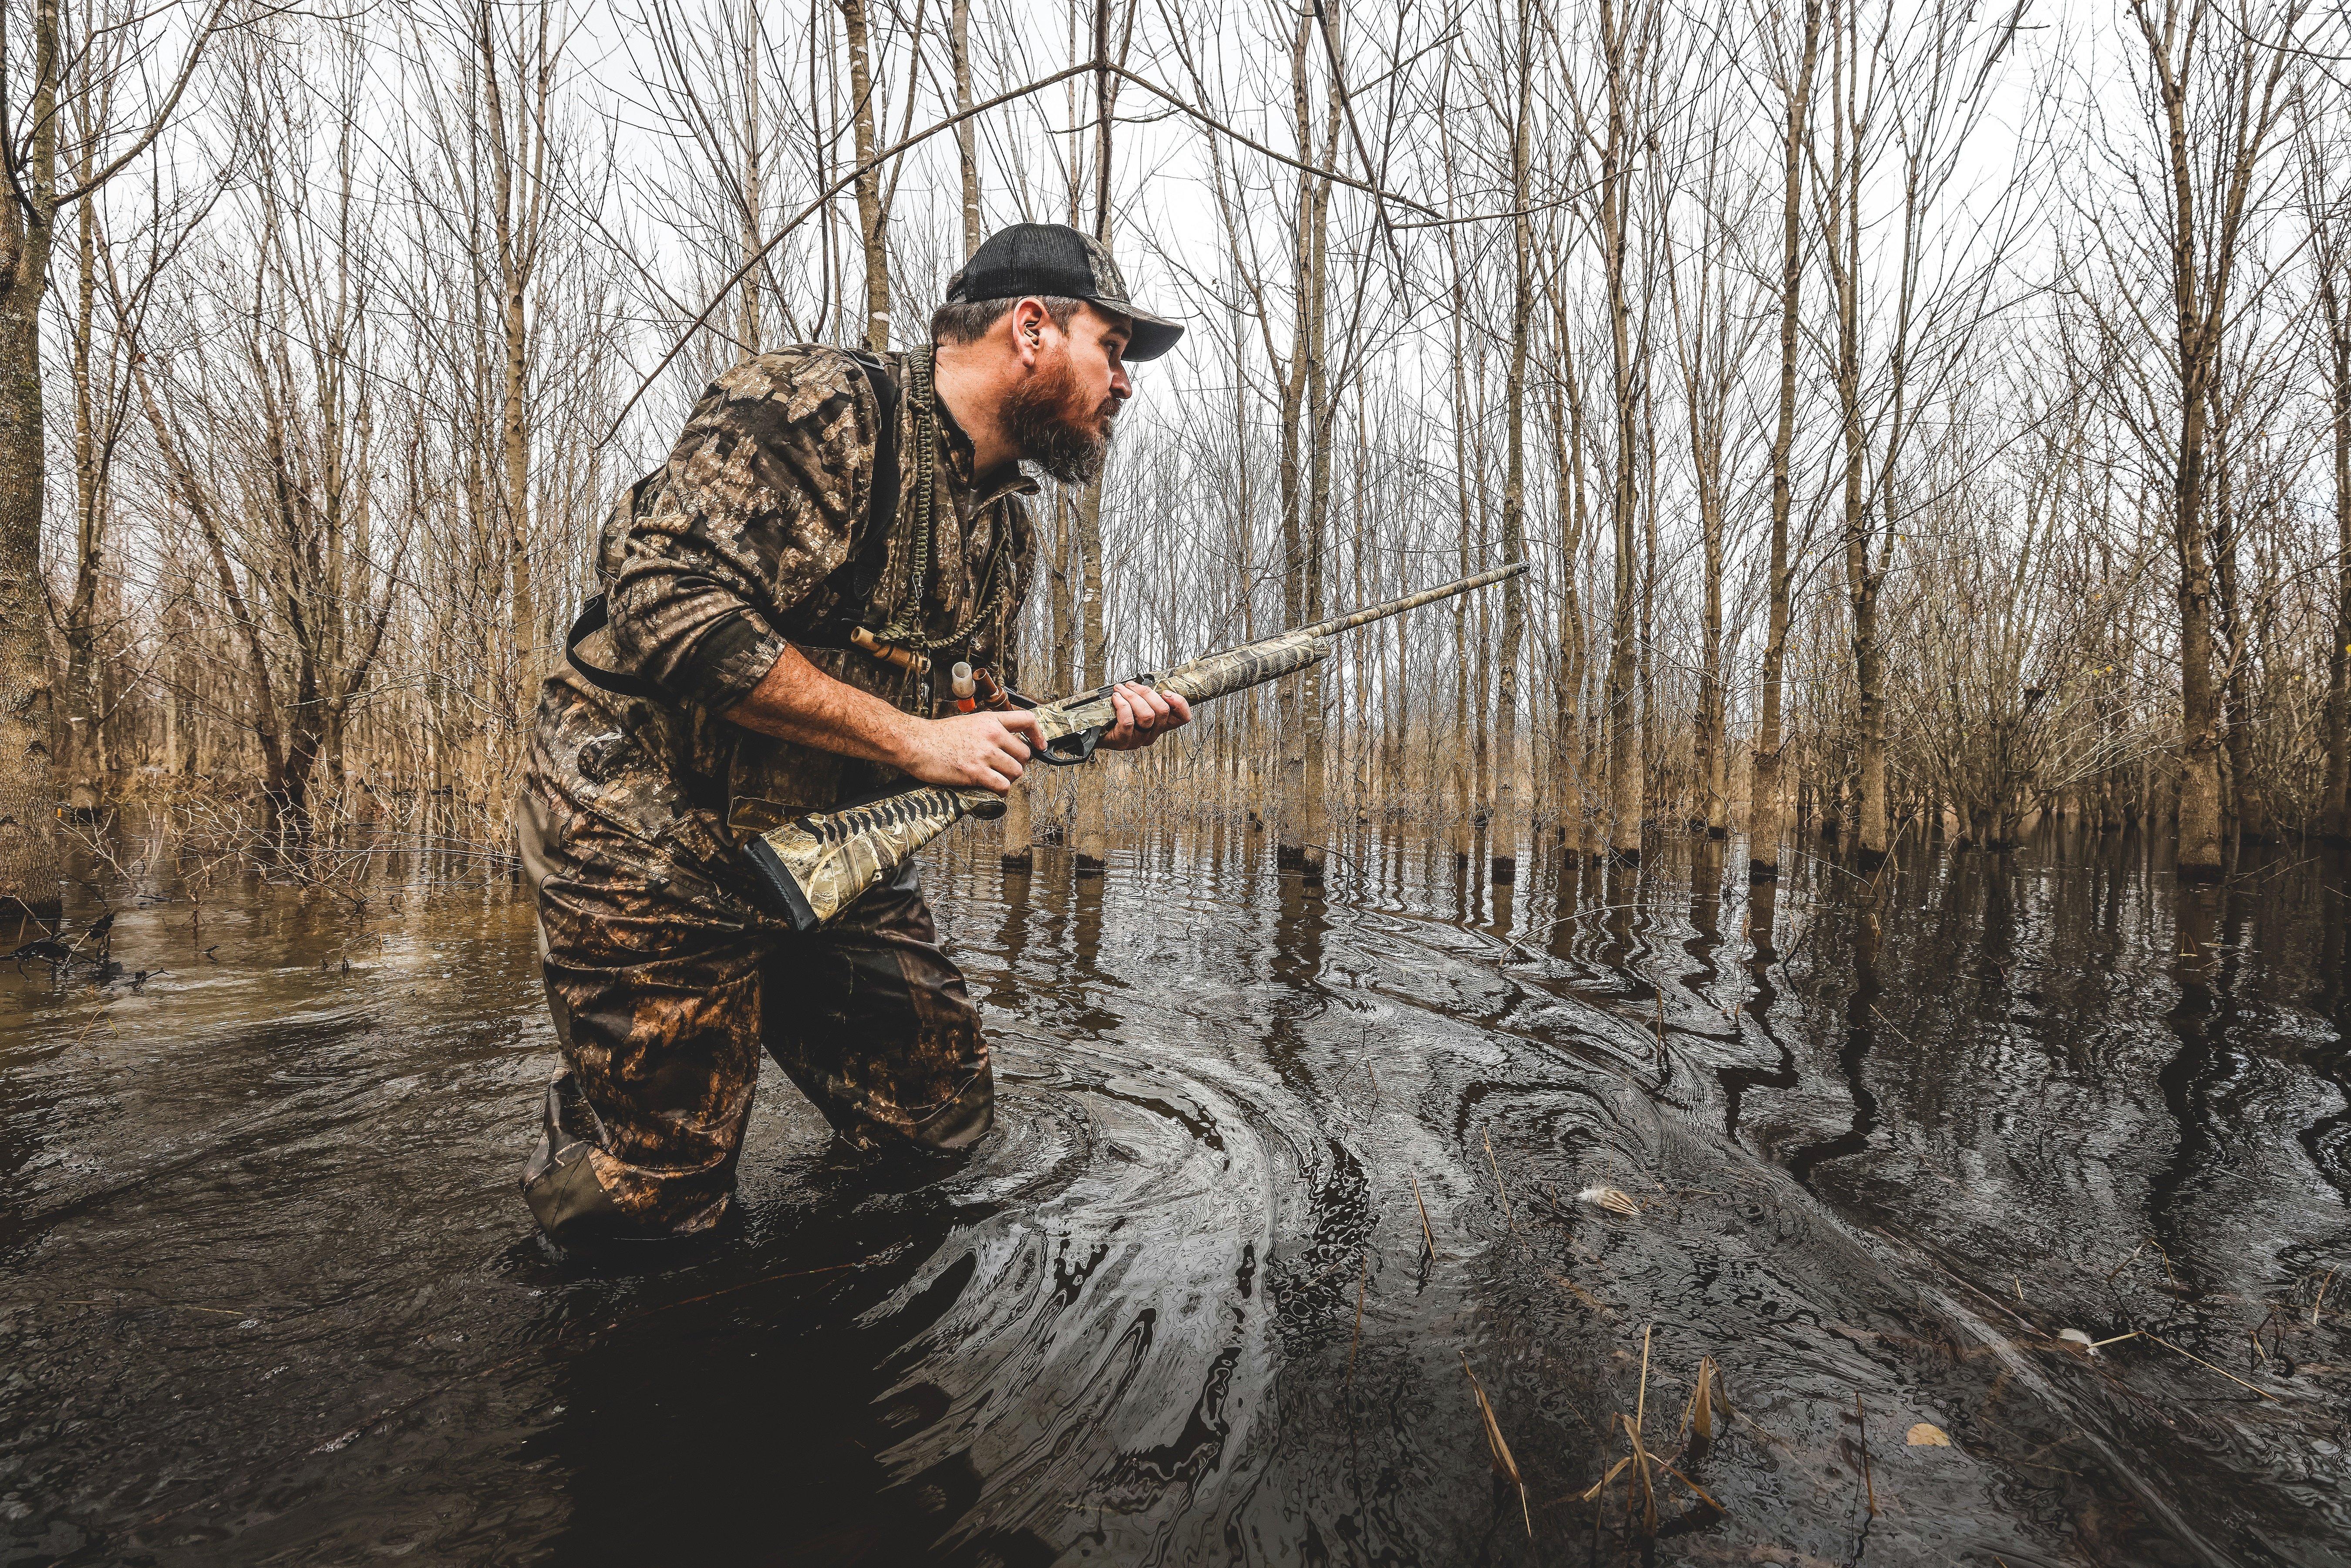 Justin Martin says his grandparents taught him how to improve the habitat to attract more wildlife. Image by Realtree